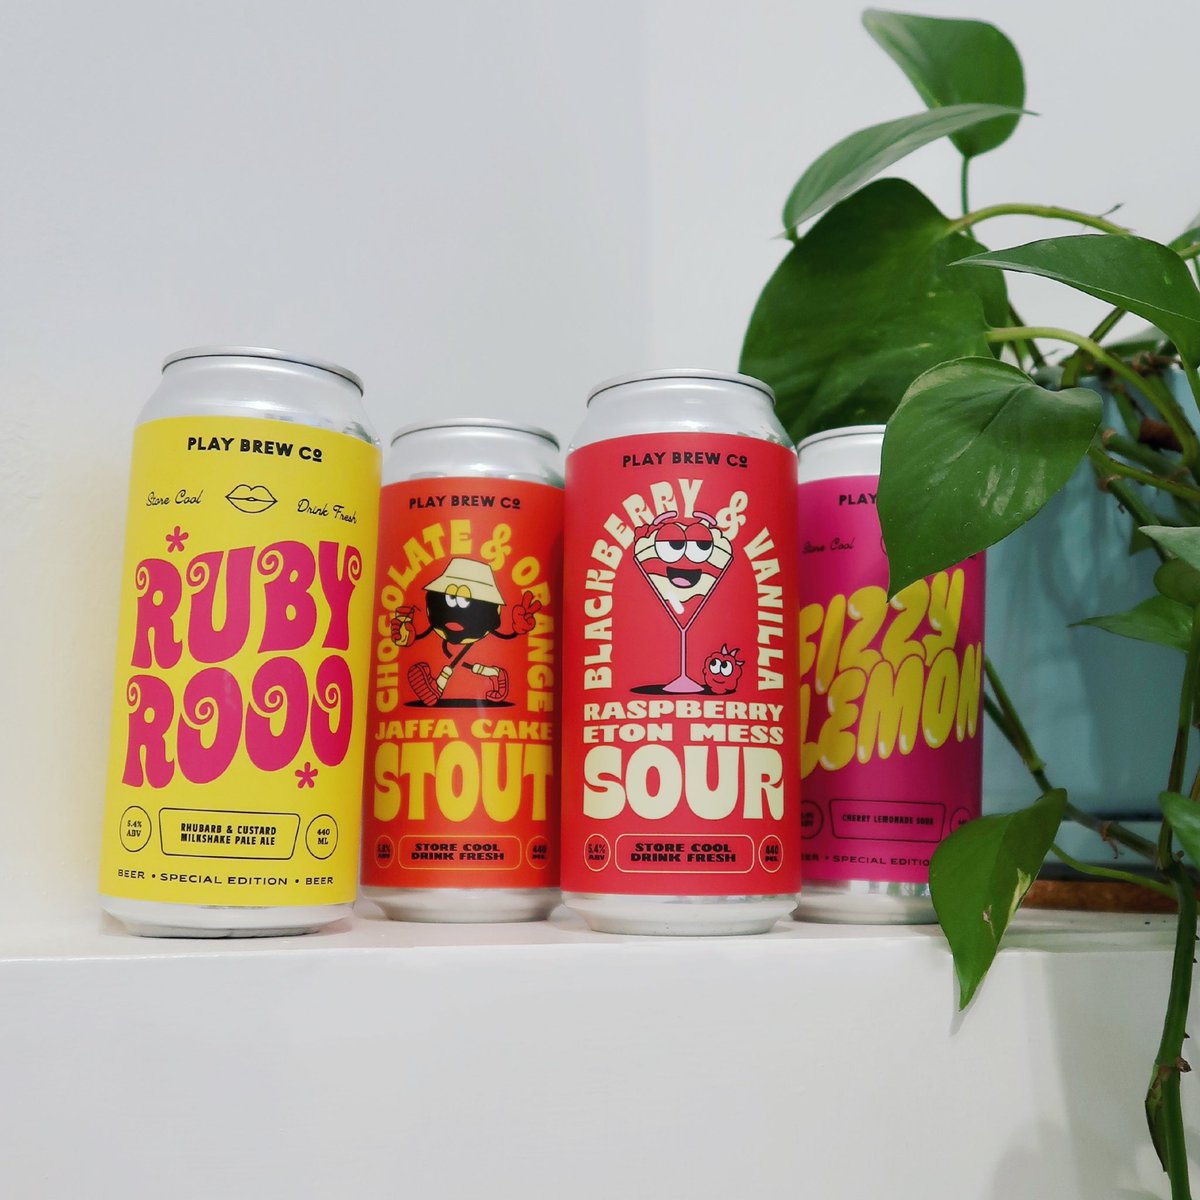 Don’t forget to join us and @breweryjeweller at Hebburn Food Market on Saturday, when we’ll have these new @PlayBrewCo beers available: 🔸Rhubarb & Custard Milkshake Pale Ale 🌱 ▪️Chocolate & Orange Stout 🔹Blackberry & Vanilla Sour 🌱 ▫️Cherry Lemonade Sour 🌱 🌱= vegan